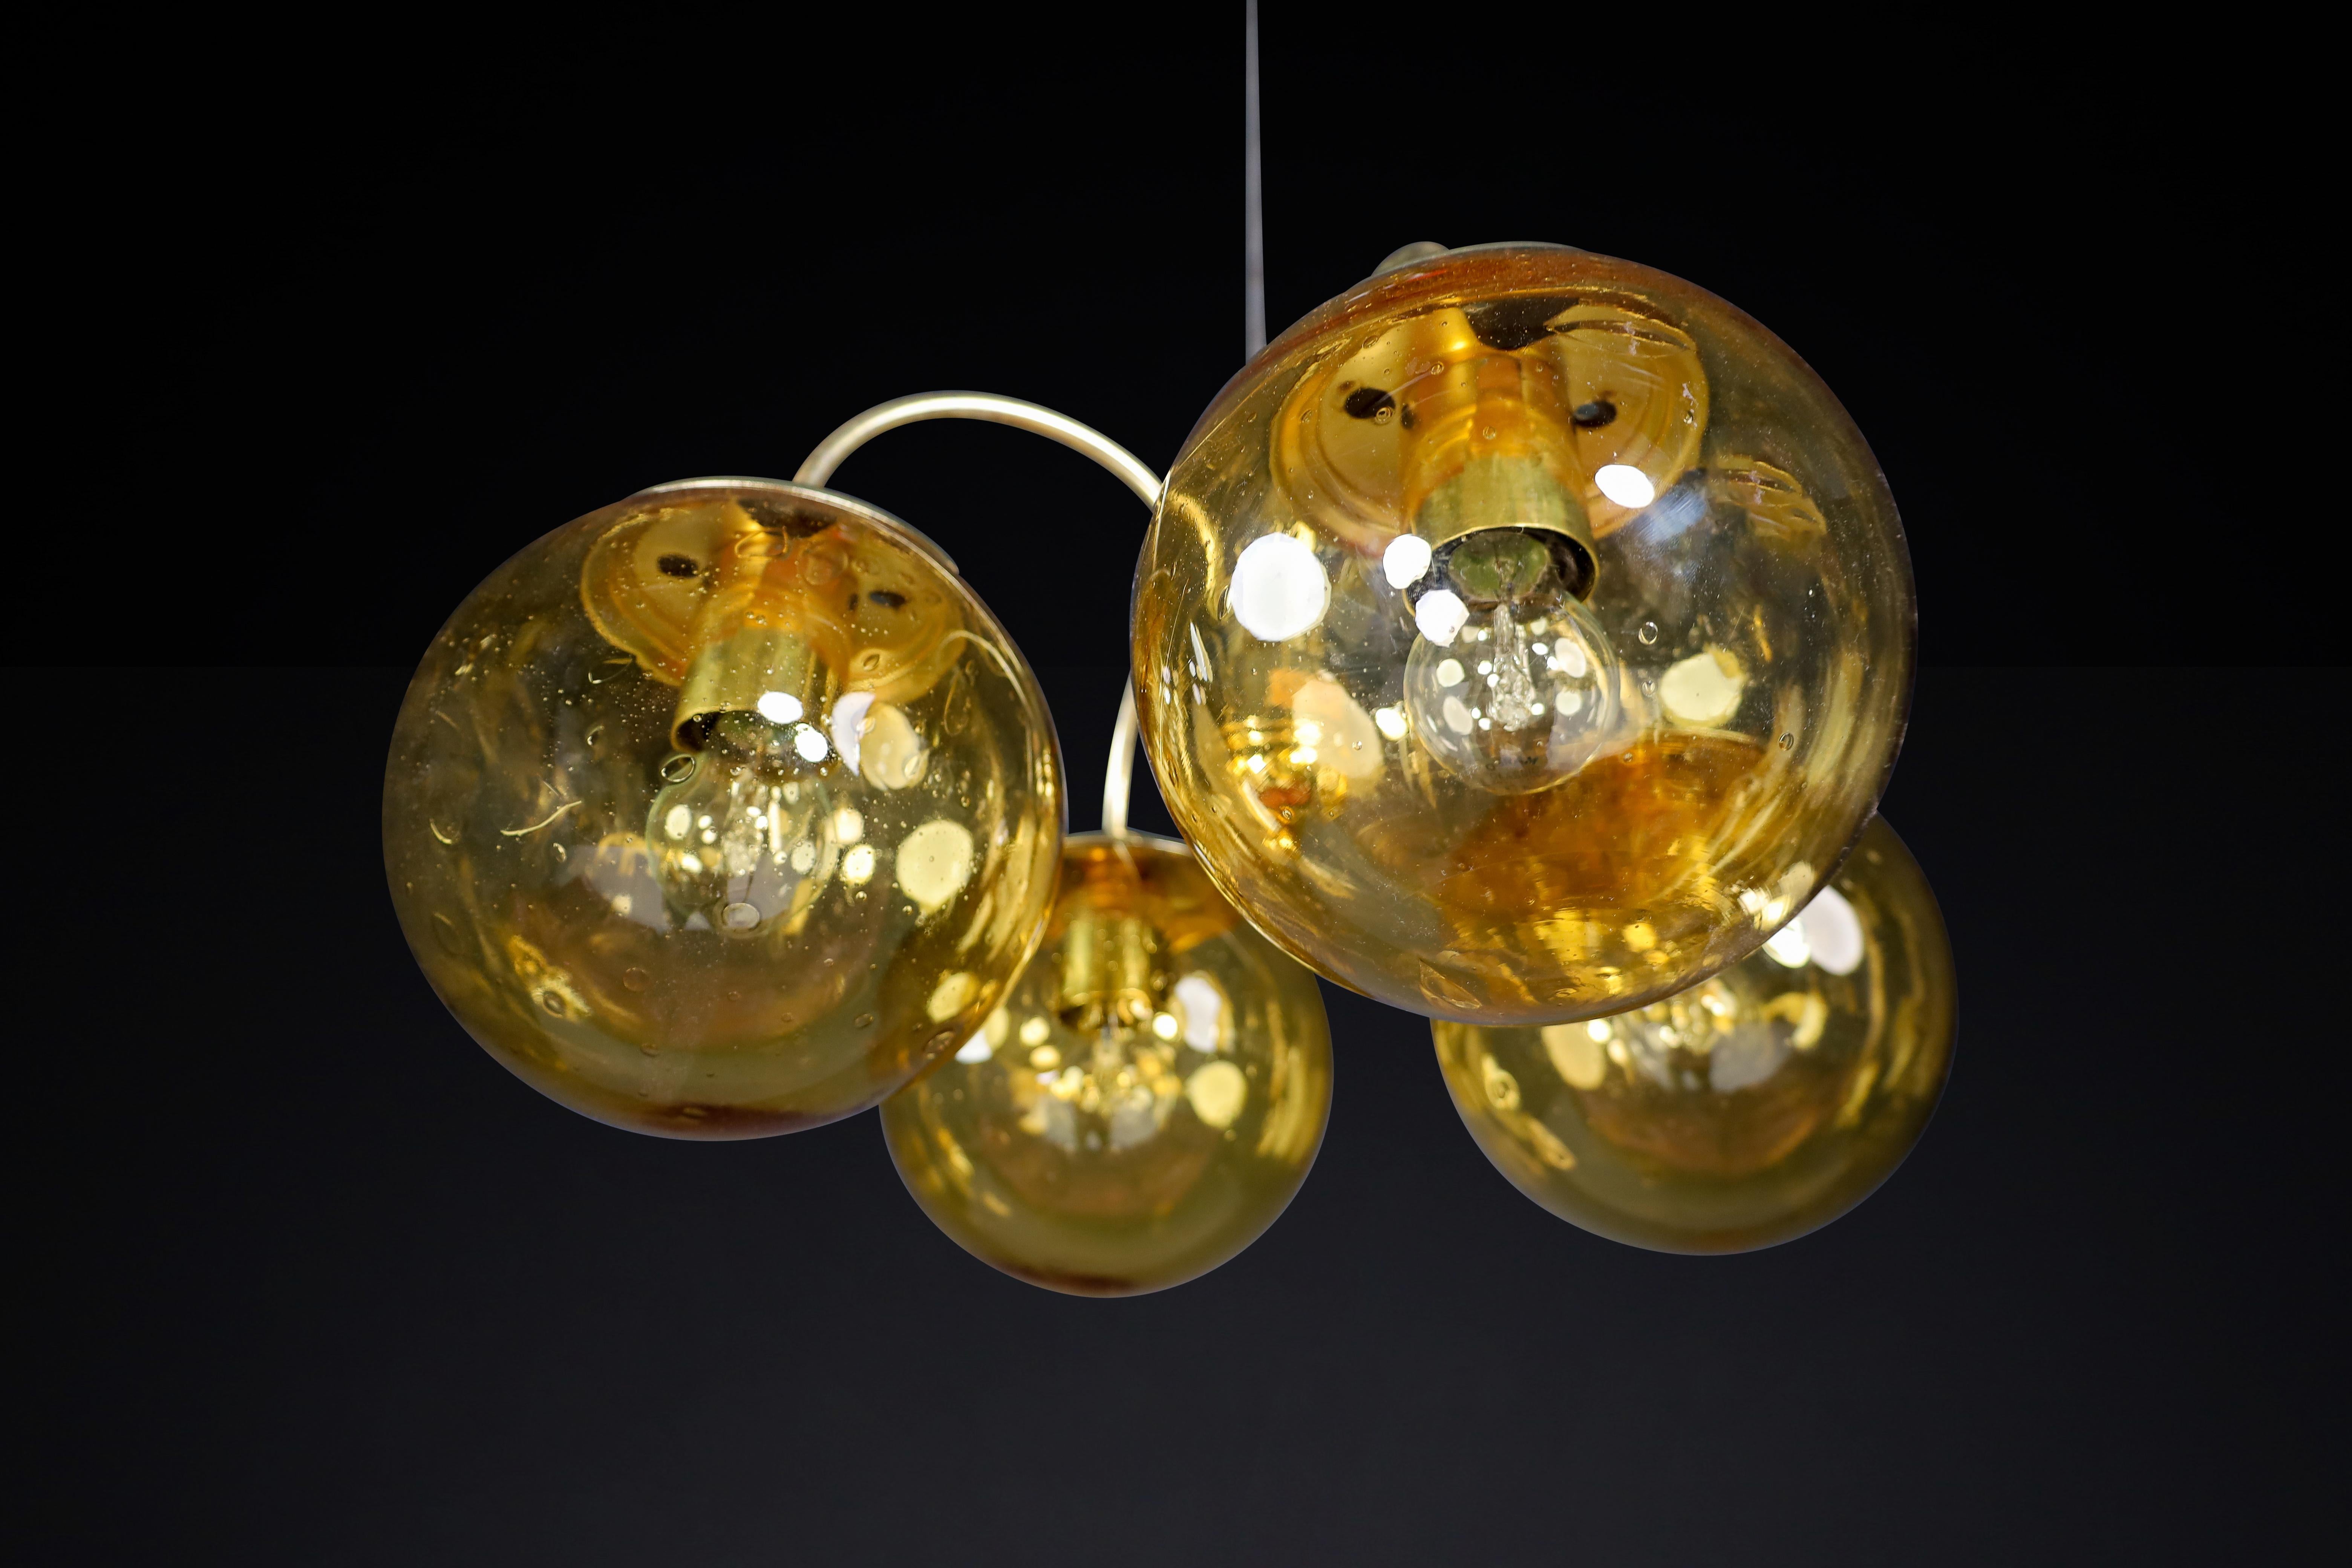 Midcentury Chandeliers in Brass and Amber-Colored Glass Czech Republic, 1960s For Sale 3